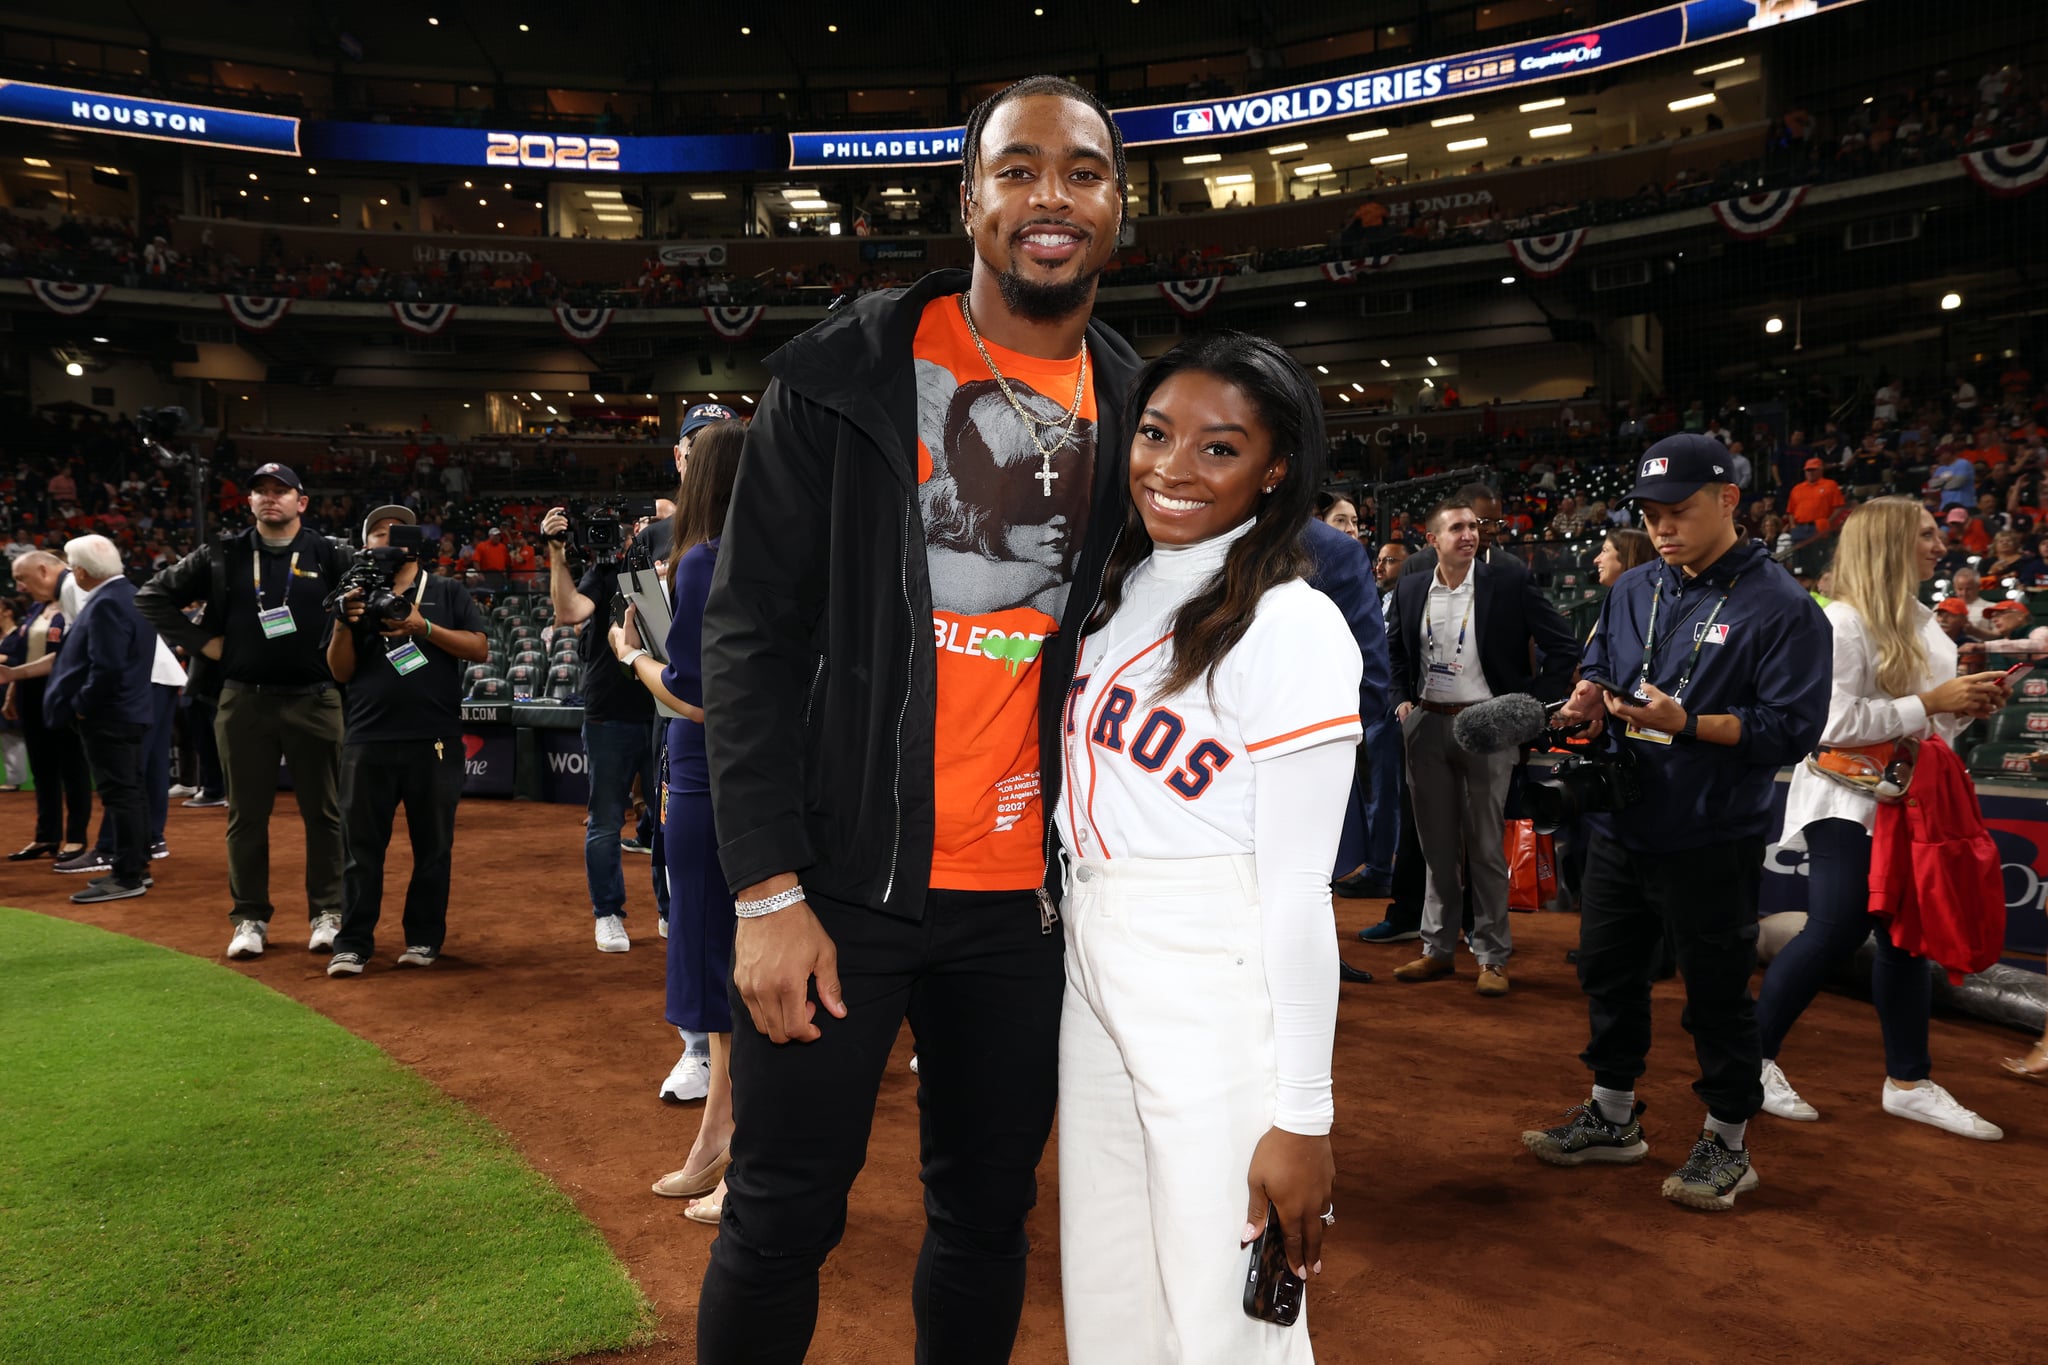 HOUSTON, TX - OCTOBER 28:  Olympic gold medalist Simone Biles and Houston Texans safety Jonathan Owens are seen prior to Game 1 of the 2022 World Series between the Philadelphia Phillies and the Houston Astros at Minute Maid Park on Friday, October 28, 2022 in Houston, Texas. (Photo by Mary DeCicco/MLB Photos via Getty Images)